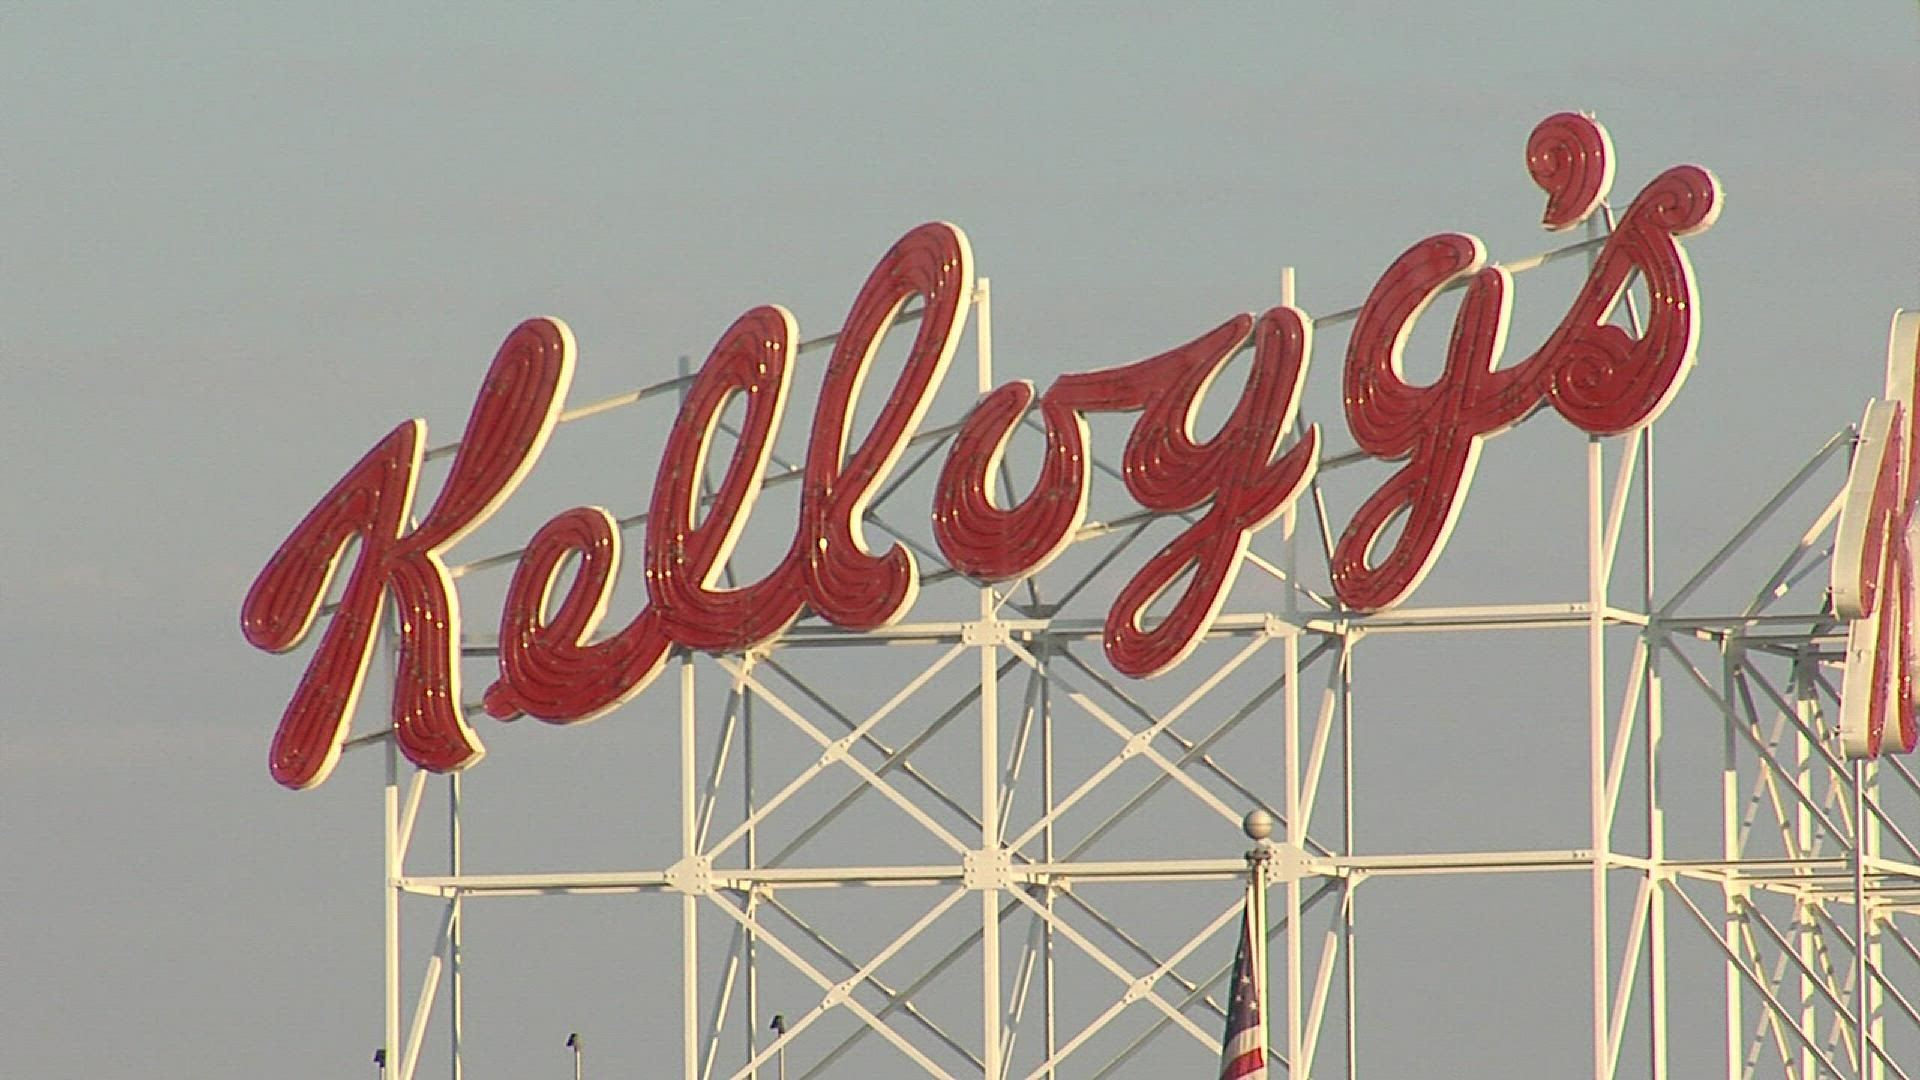 Kellogg’s workers in Memphis join strike with plants in Nebraska, Michigan and Pennsylvania